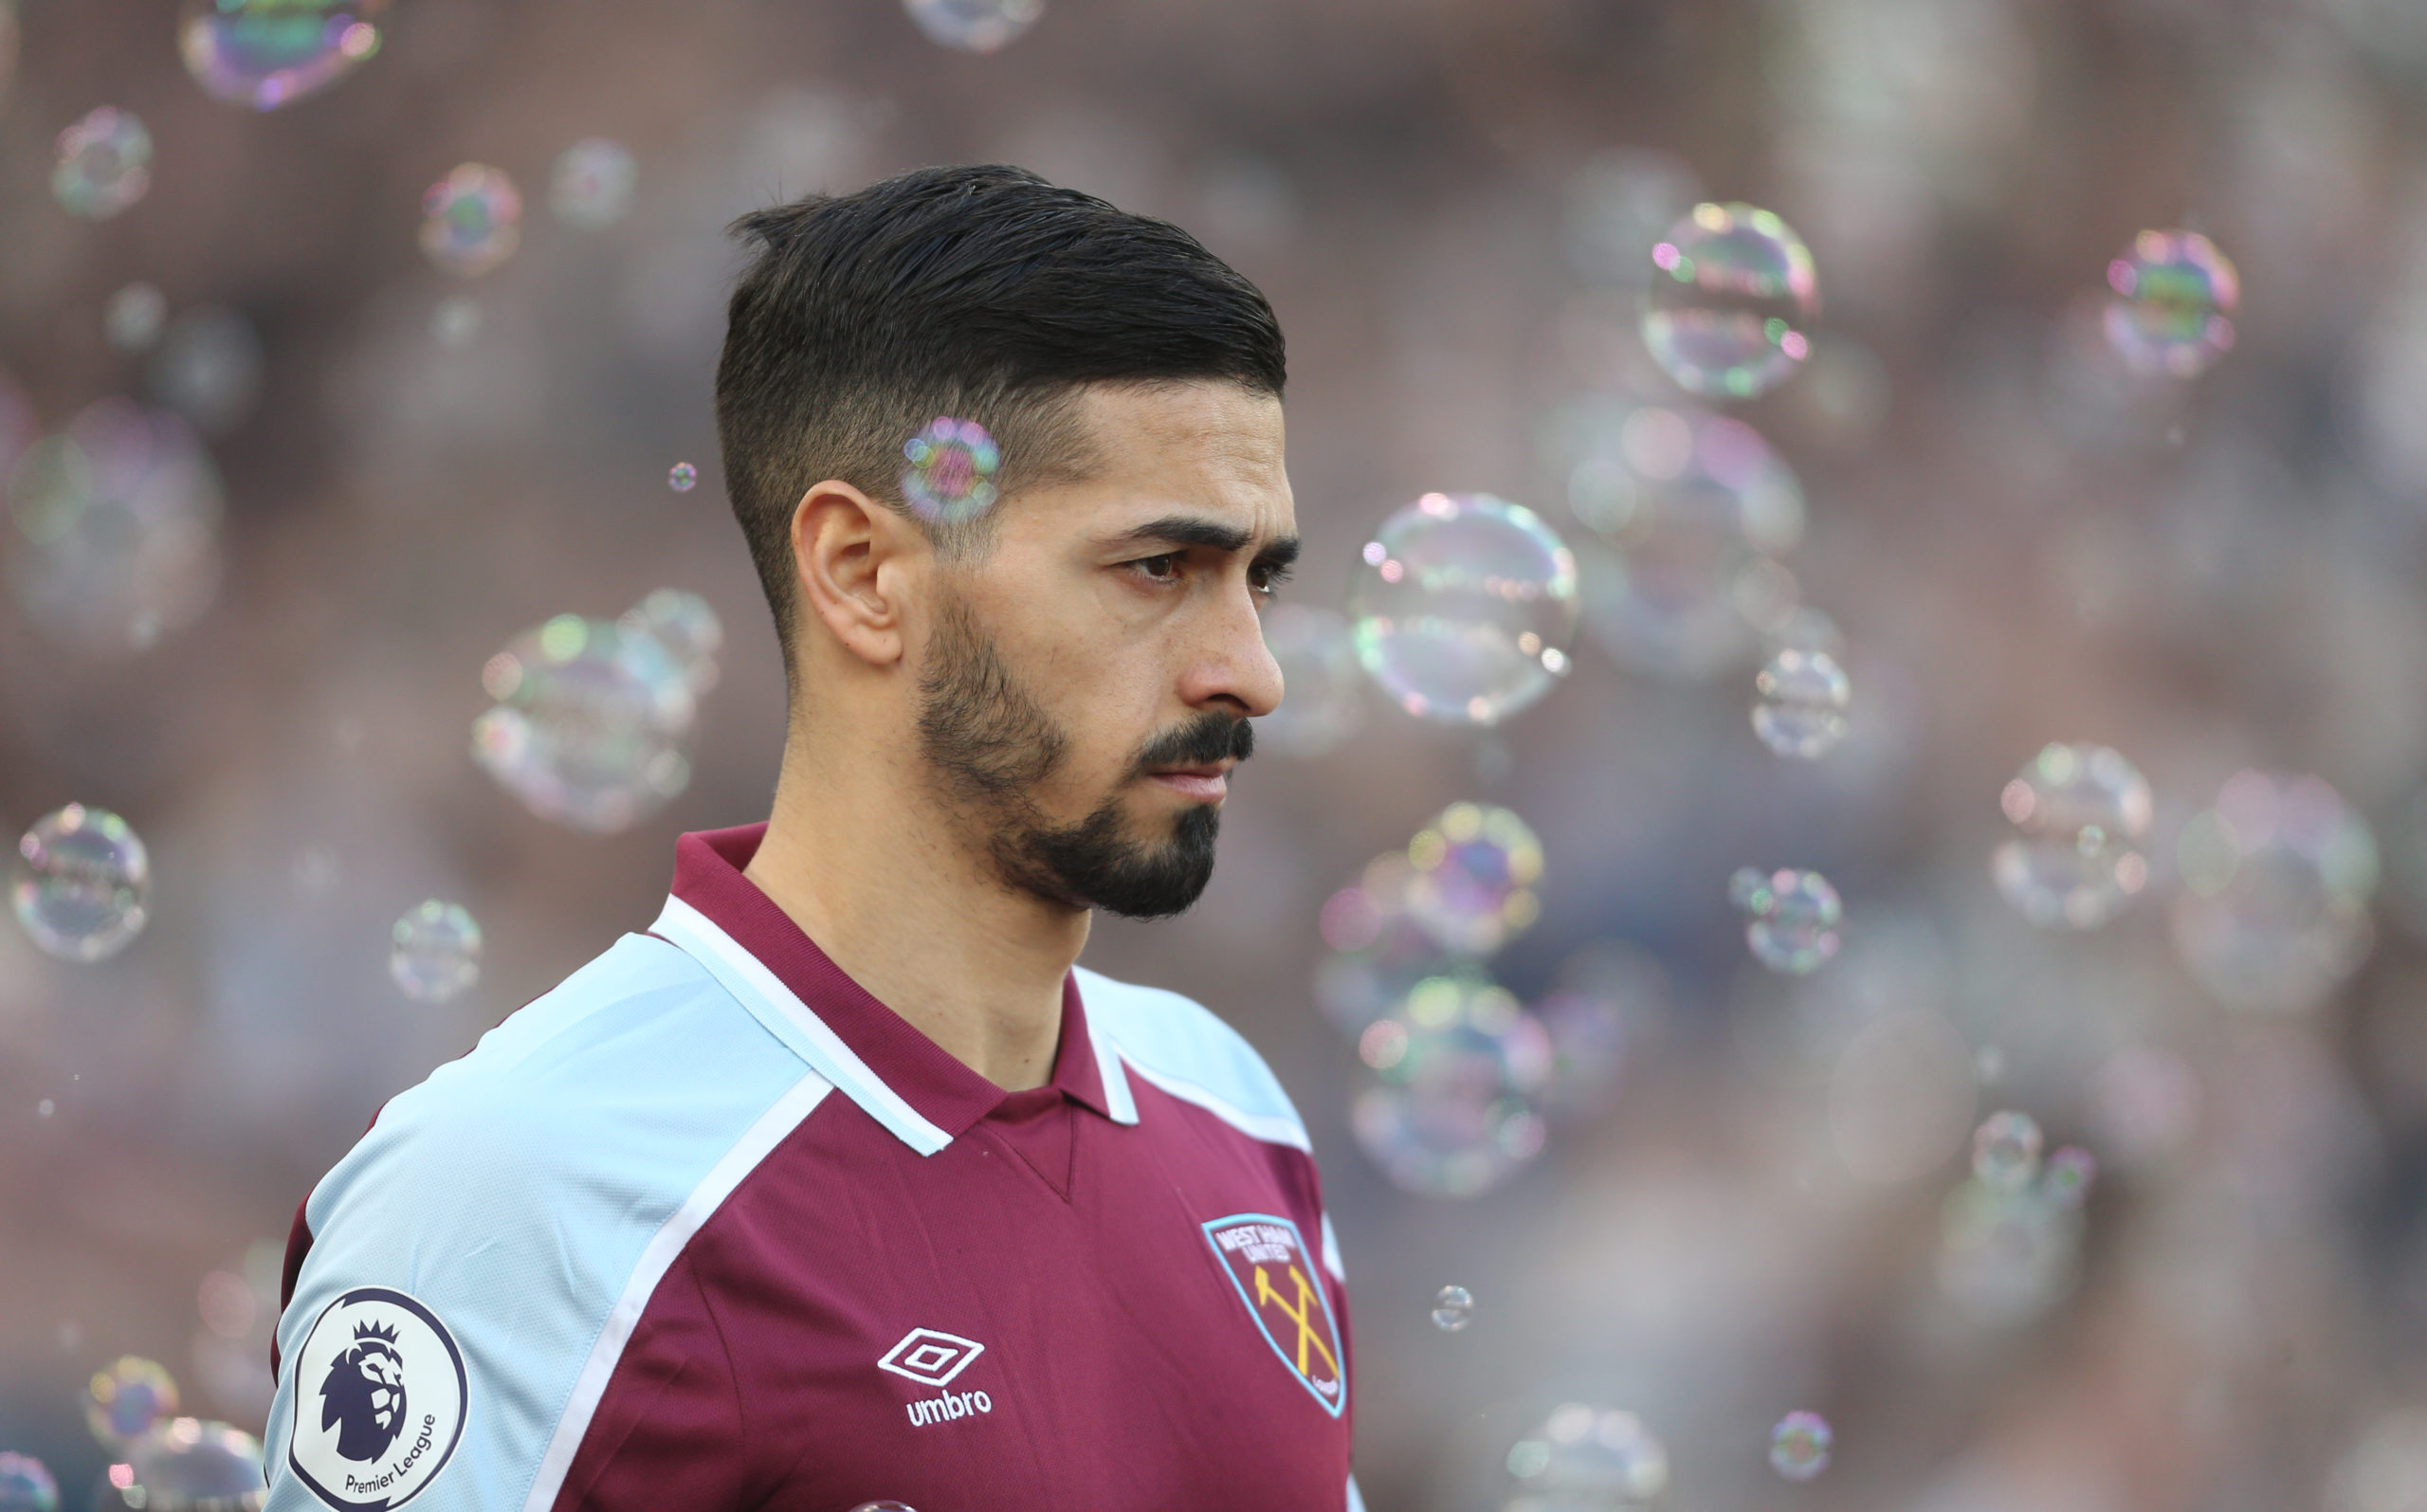 West Ham suffer Manuel Lanzini blow and defender Arthur Masuaku sent to see knee specialist David Moyes confirms